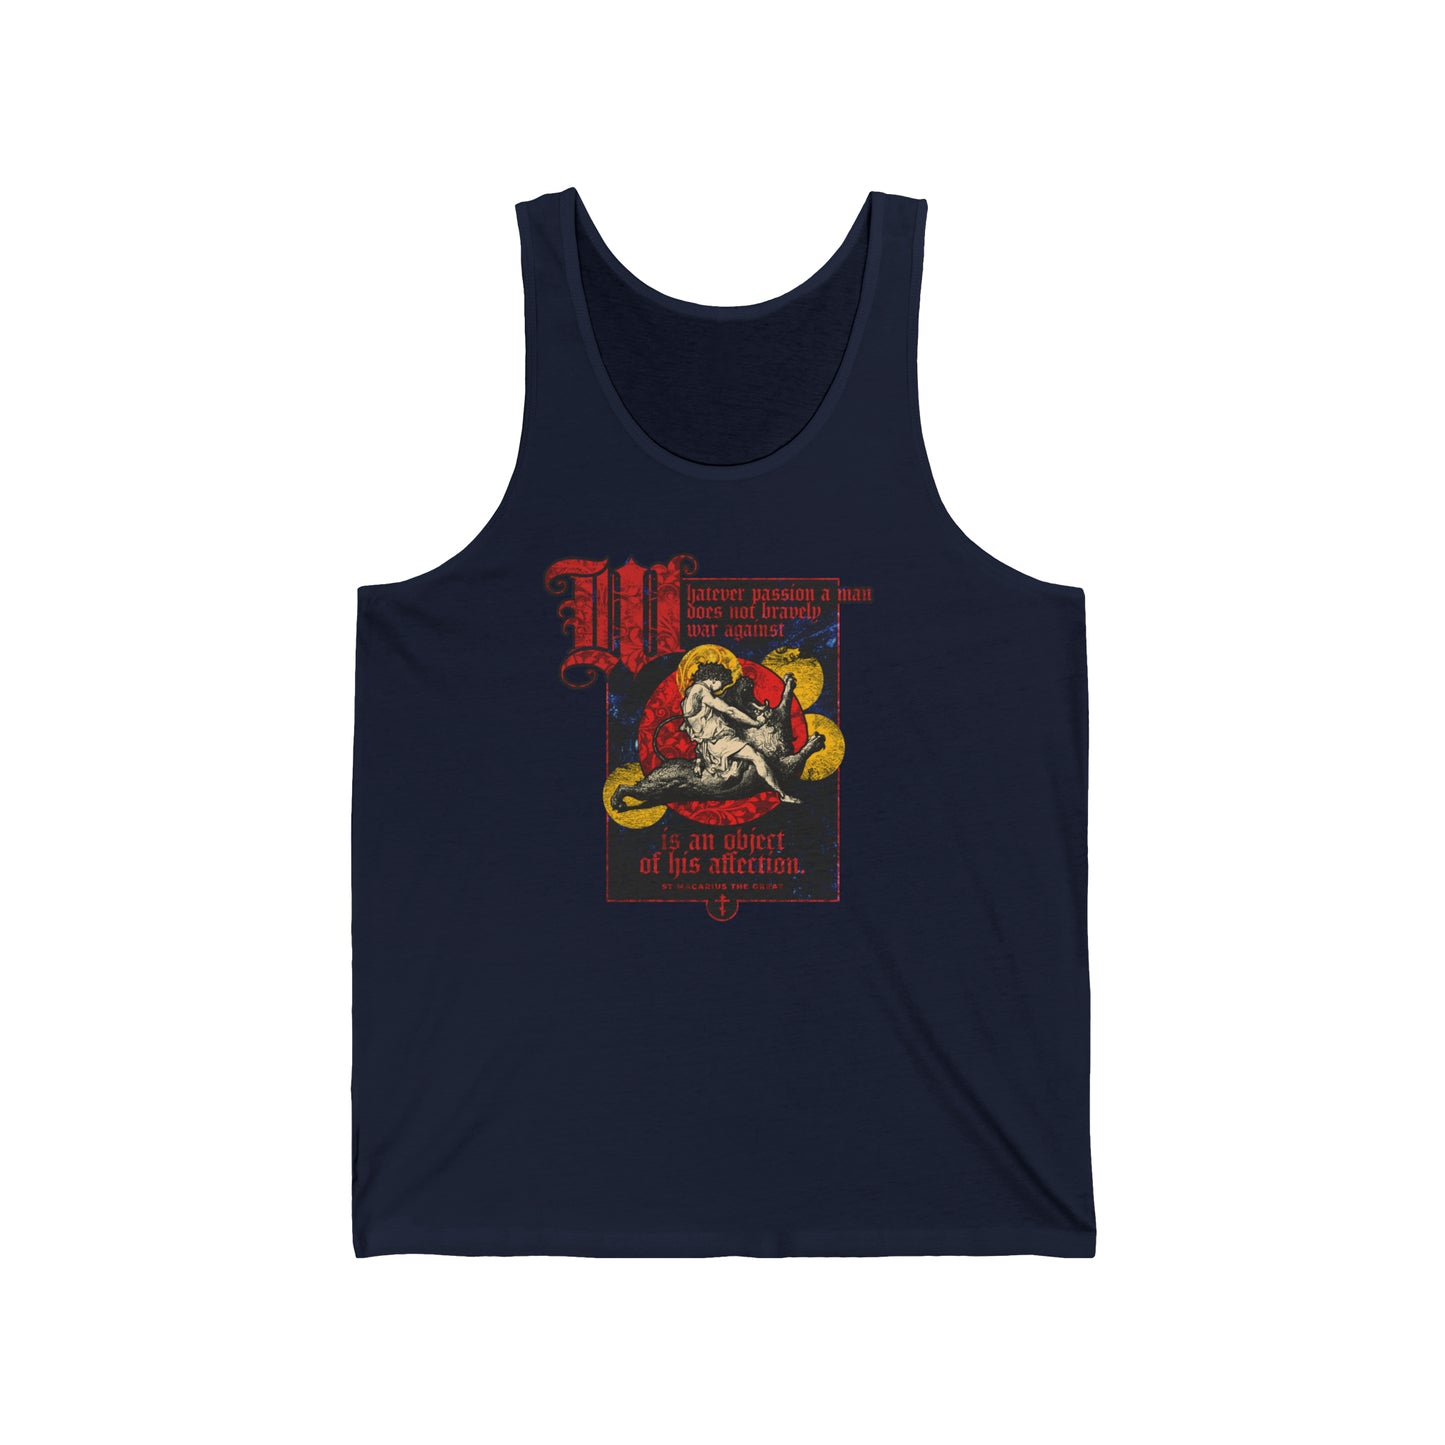 Whatever Passion a Man Does Not Bravely War Against (St Macarius the Great) No. 1 | Orthodox Christian Jersey Tank Top / Sleeveless Shirt